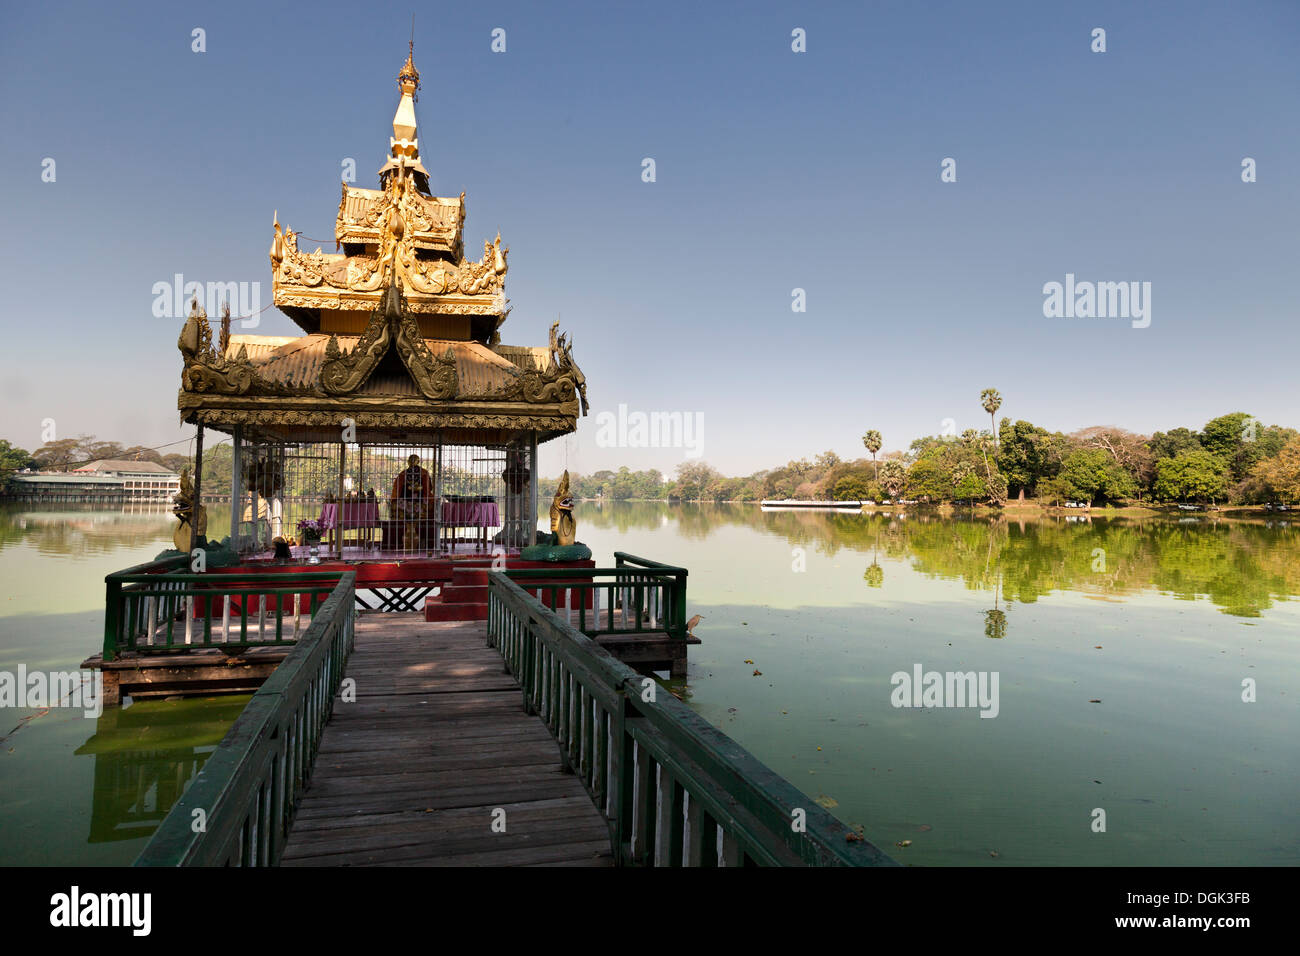 A shady pavilion with crooked spire on Kandawgyi Lake in Yangon in Myanmar. Stock Photo